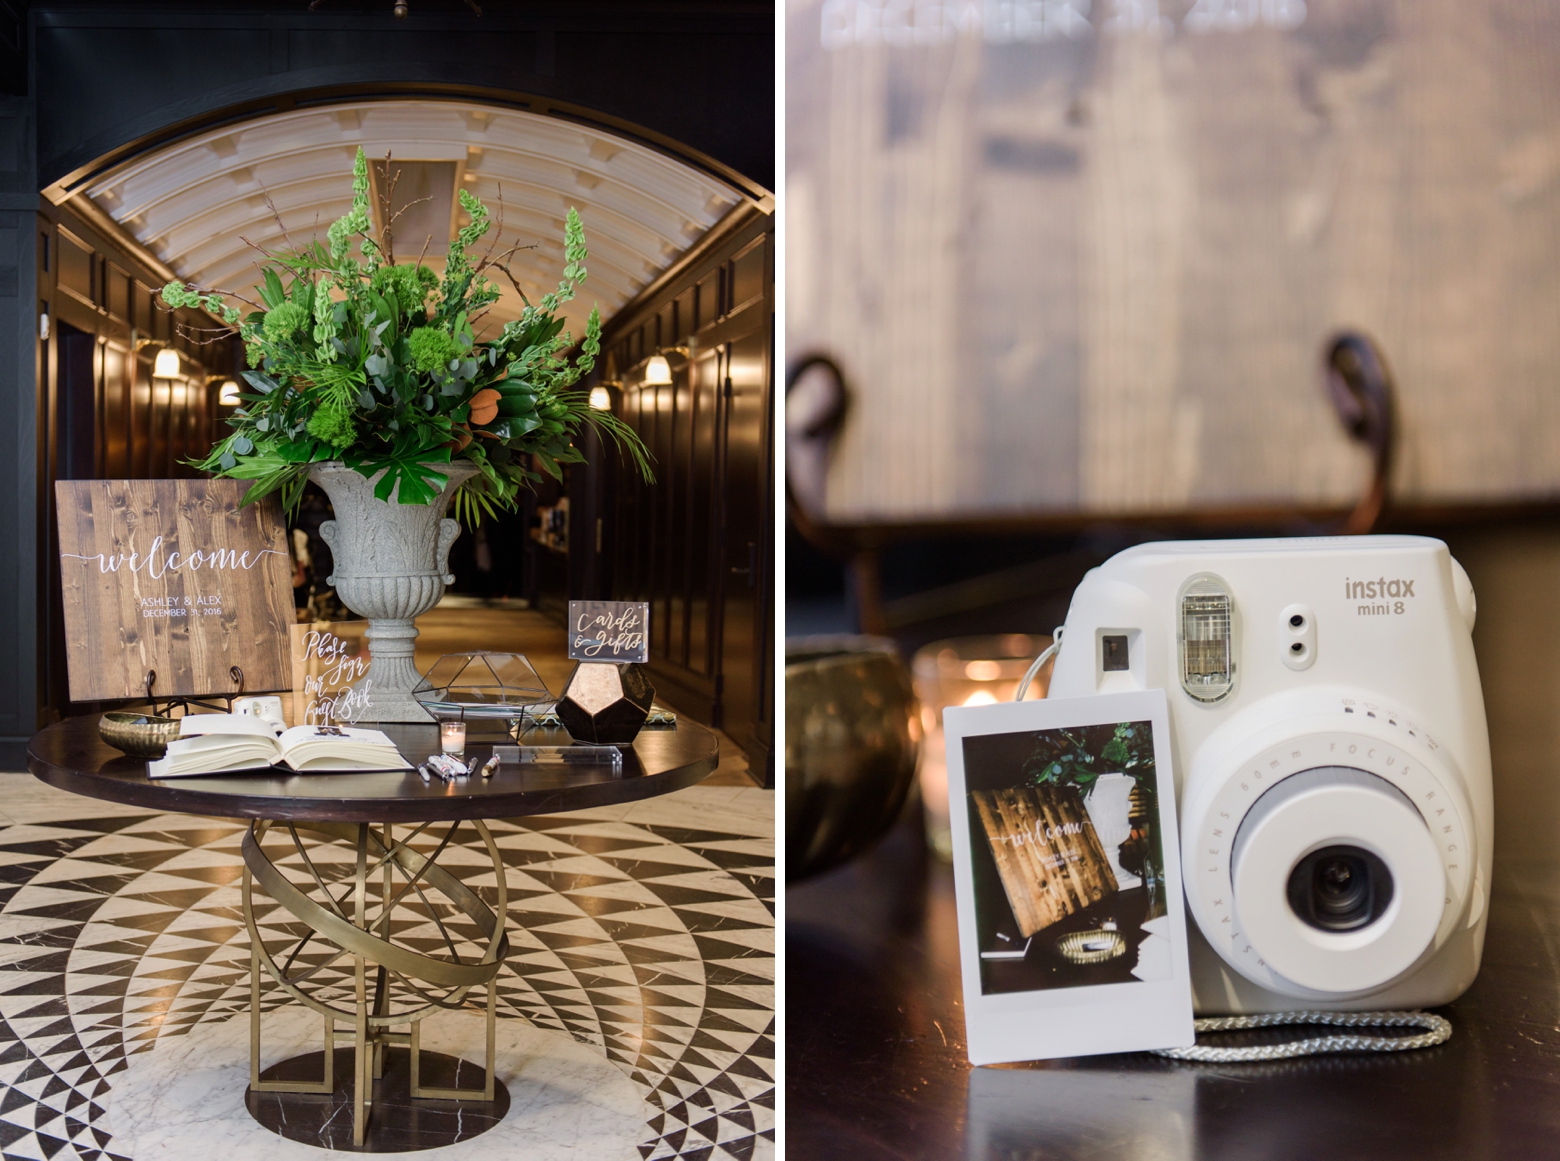 Welcome table in the bookstore of the Oxford Exchange with an instant camera for guests to take selfies